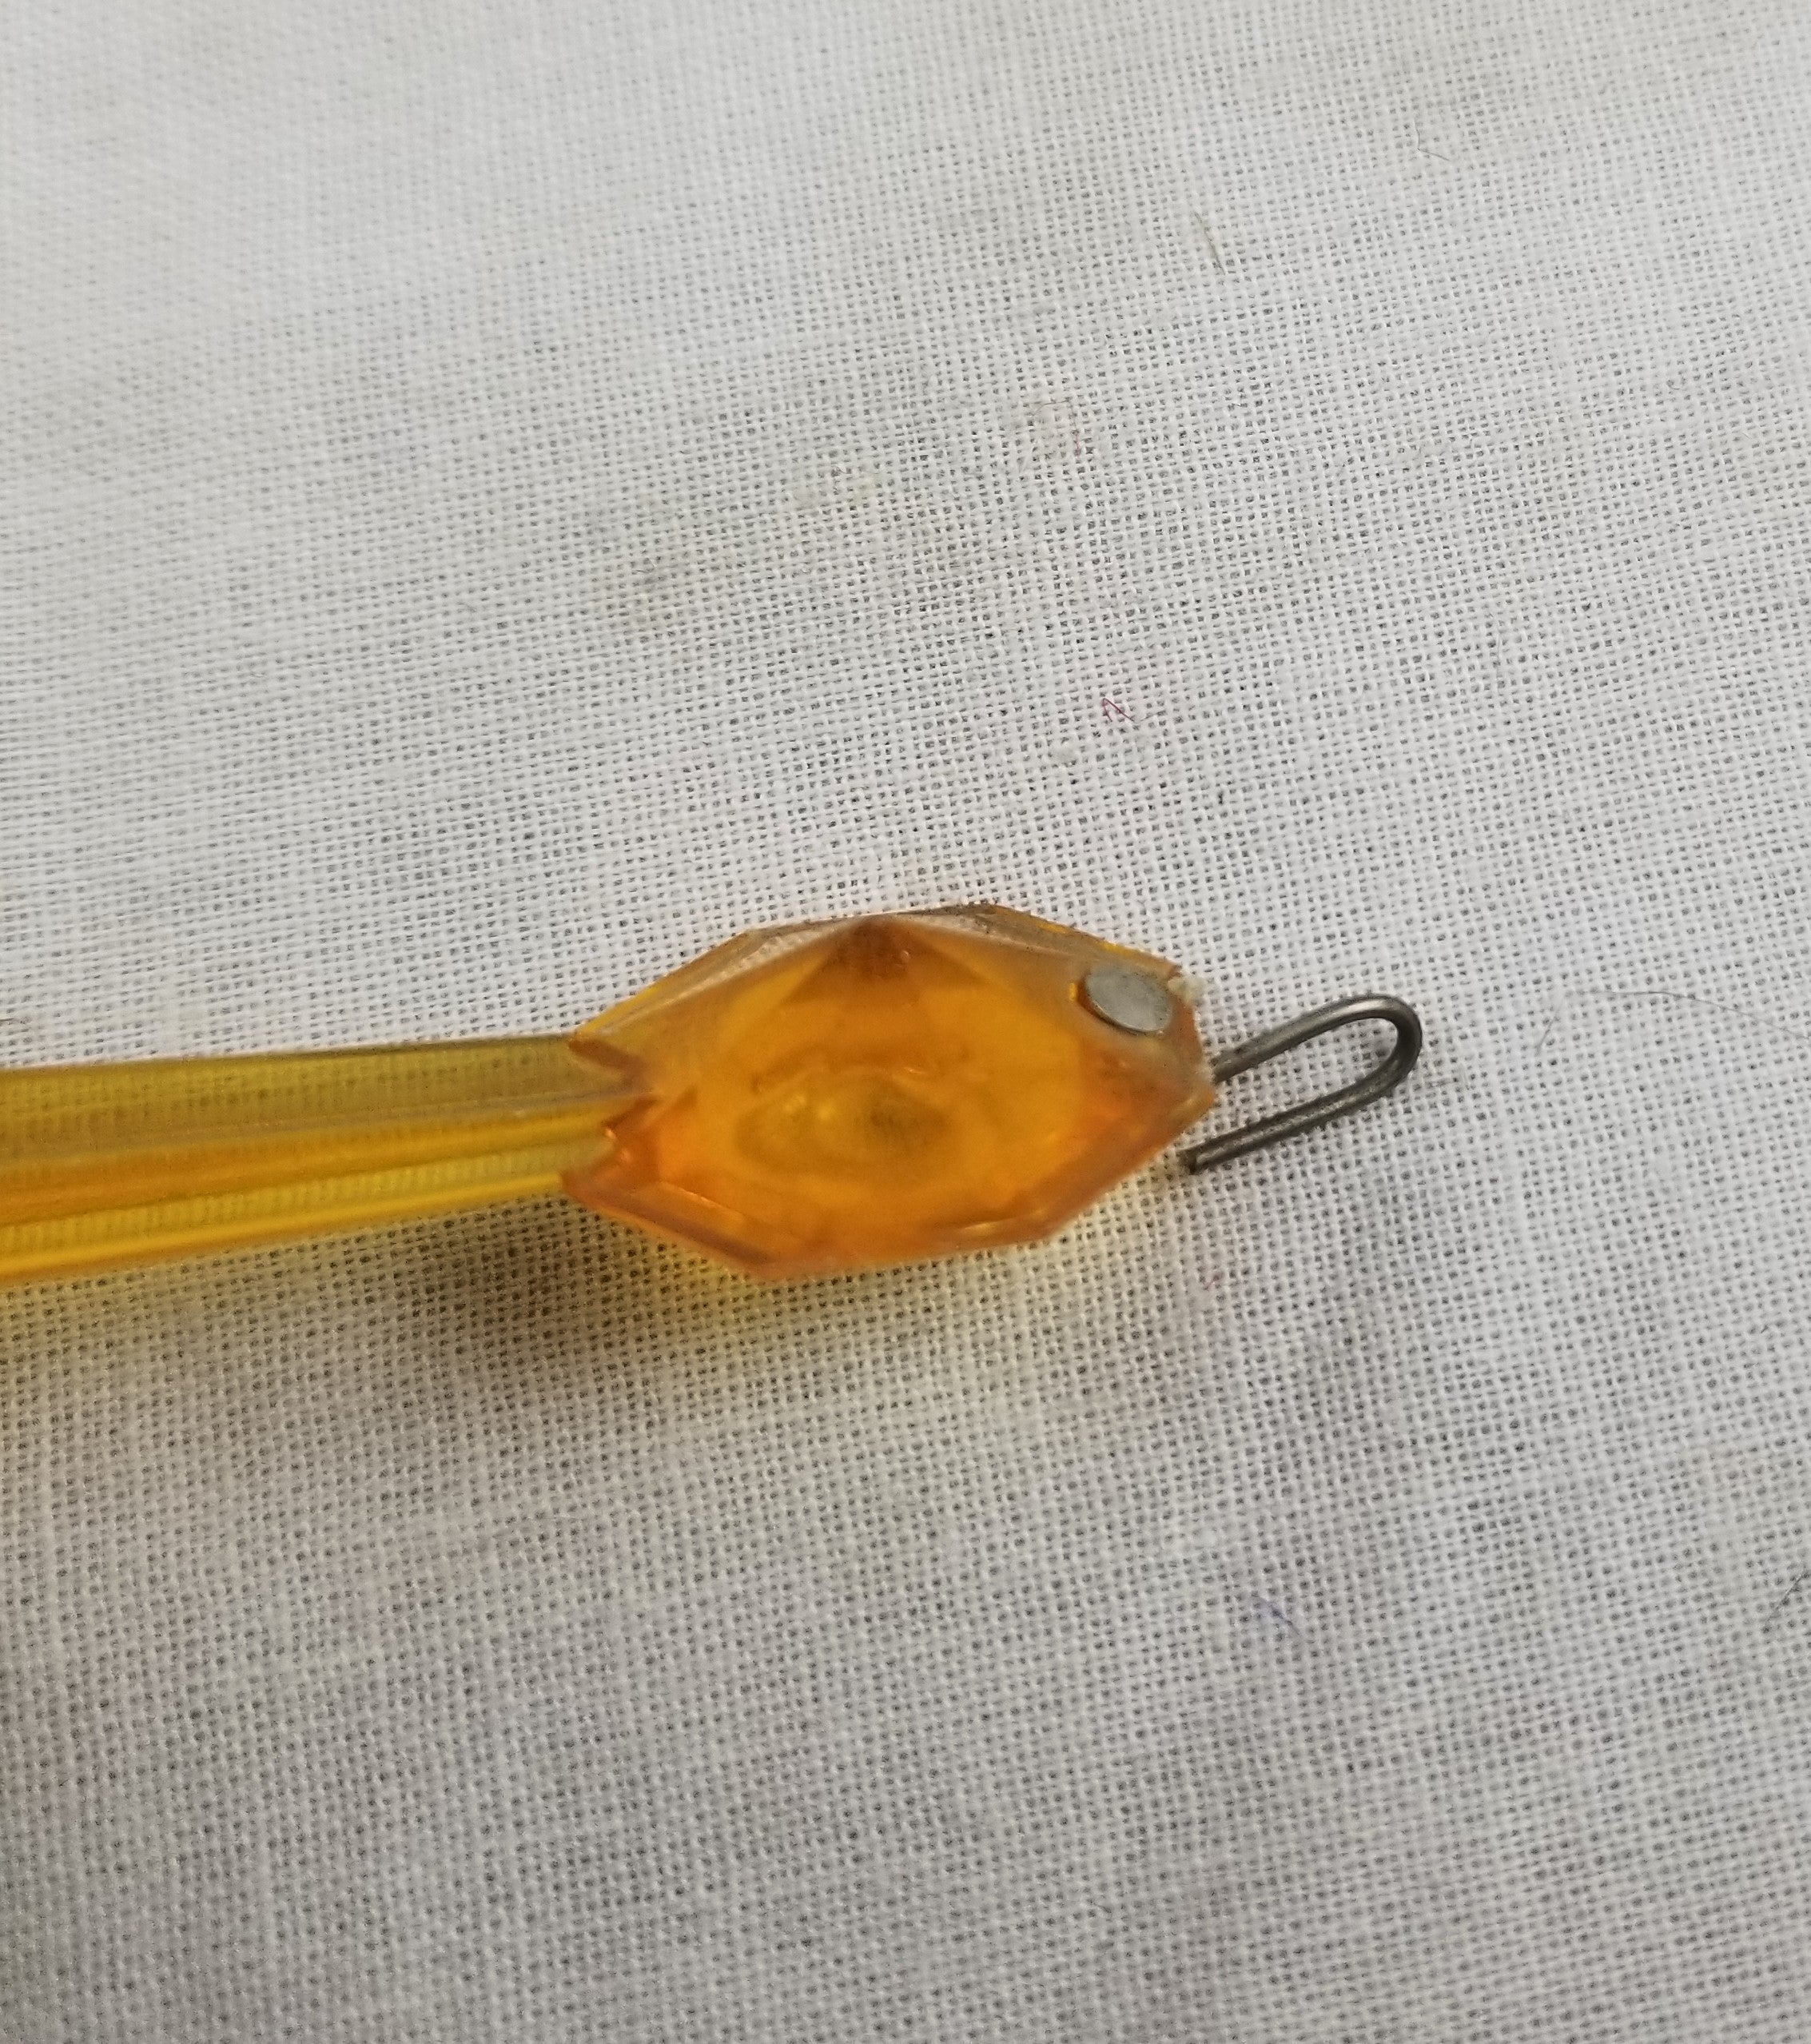 Amber Plastic Prism - 6" - One Piece Pinned **LIMITED QUANTITY**